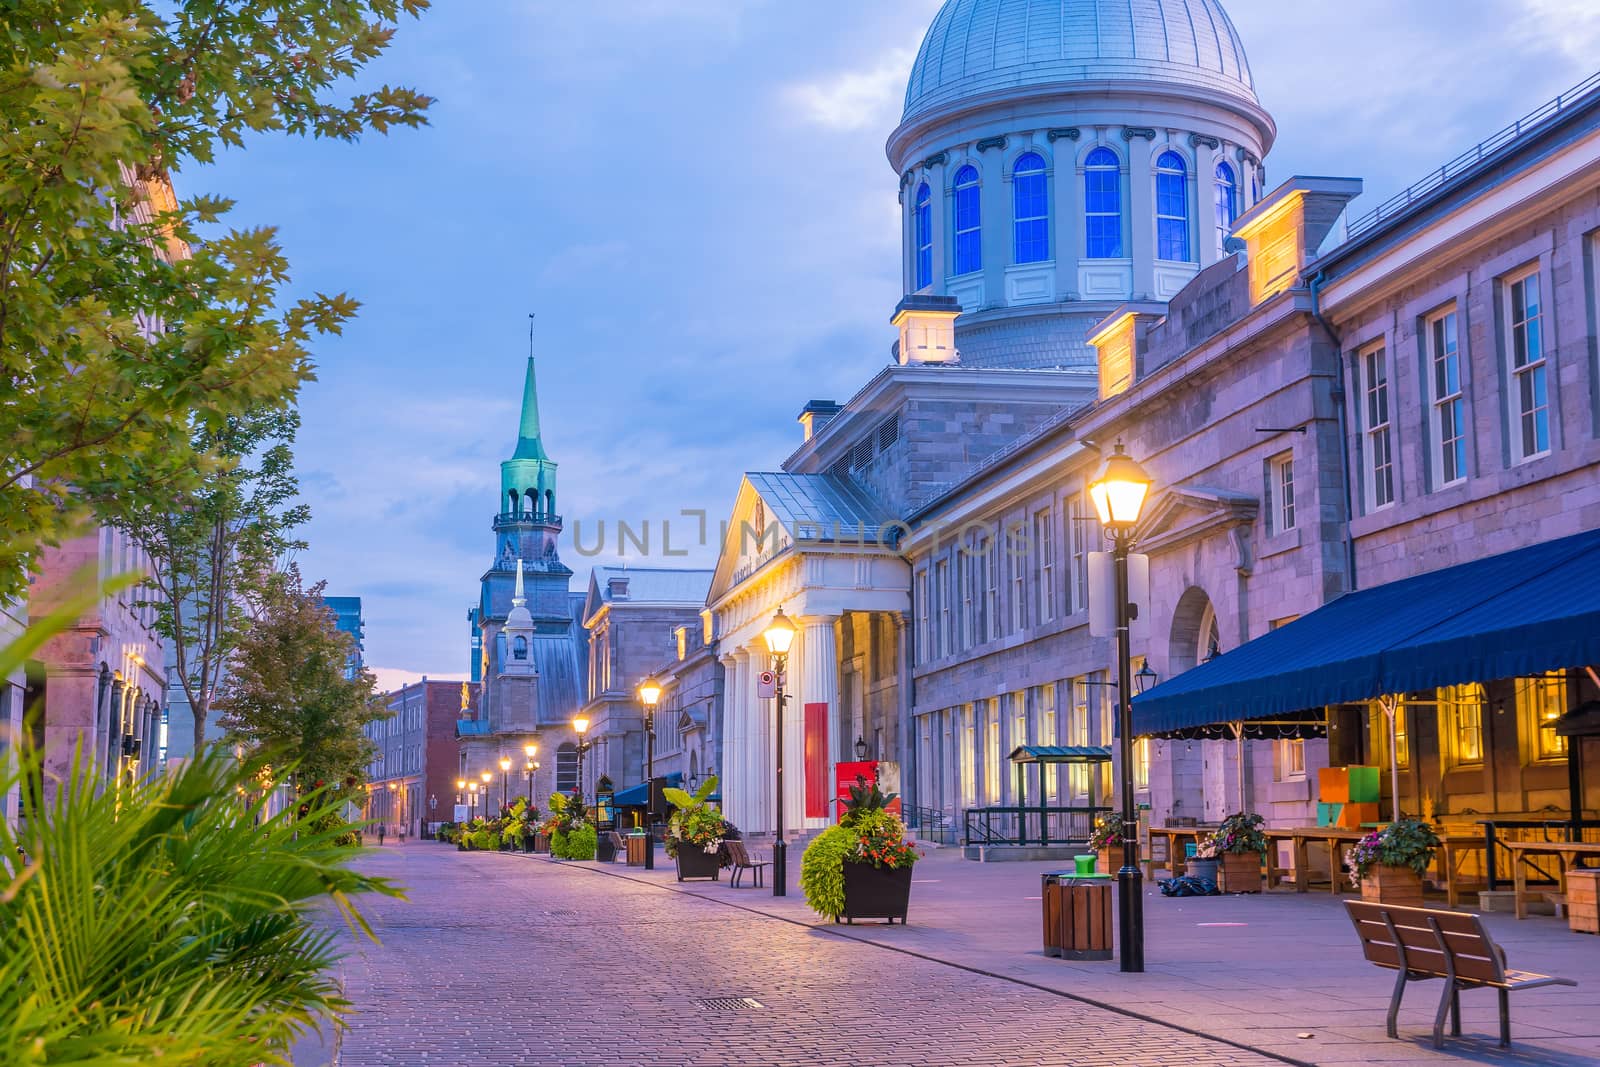 Old town Montreal at famous Cobbled streets at twilight by f11photo